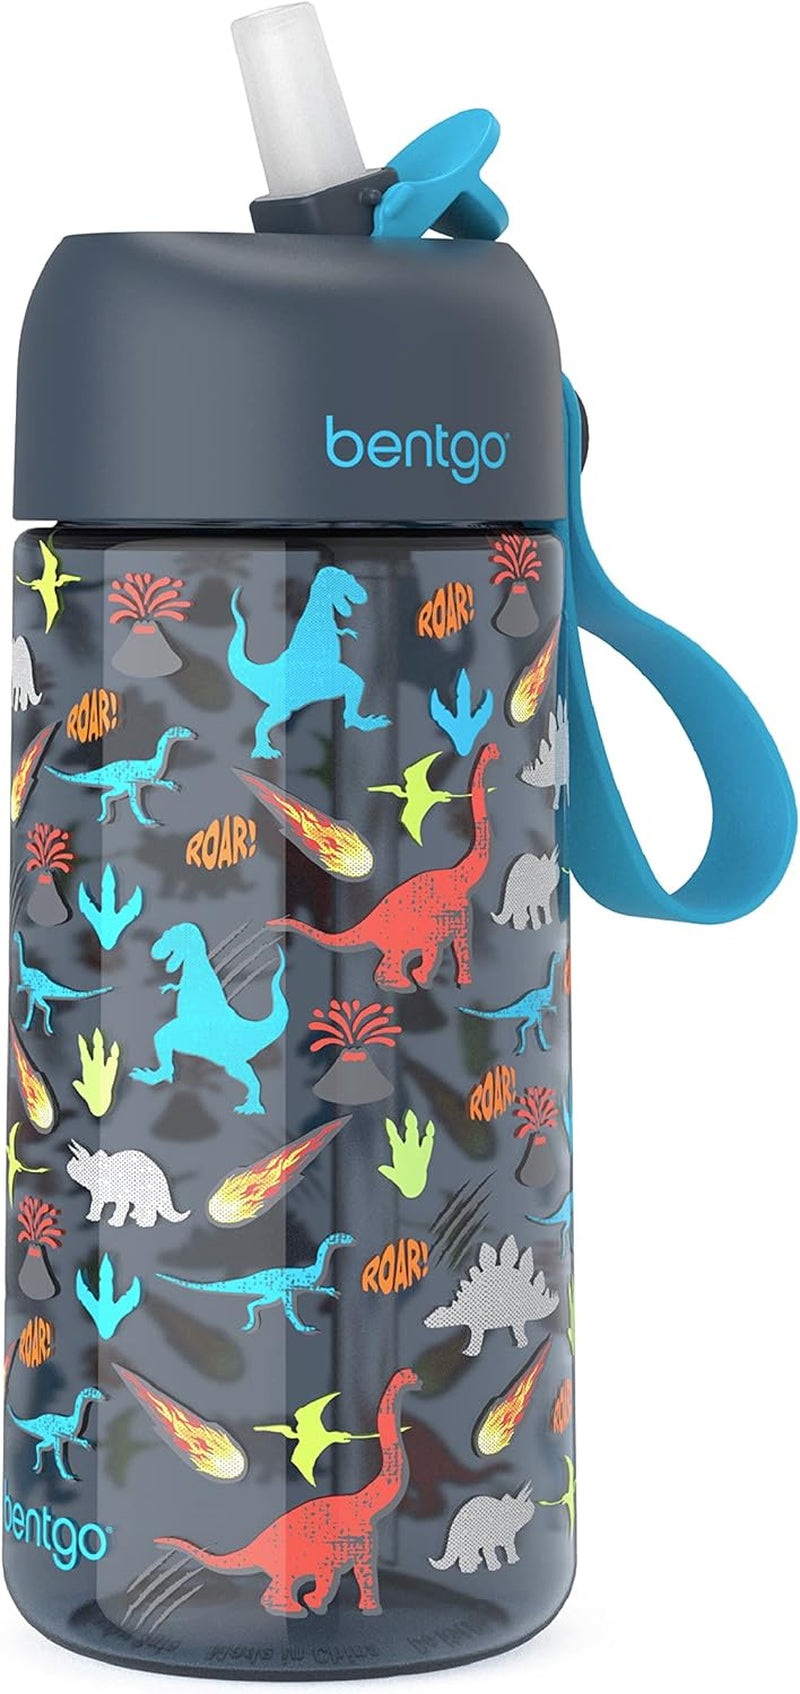 ® Kids Water Bottle - New & Improved 2023 Leak-Proof, Bpa-Free 15 Oz. Cup for Toddlers & Children - Flip-Up Safe-Sip Straw for School, Sports, Daycare, Camp & More (Trucks)